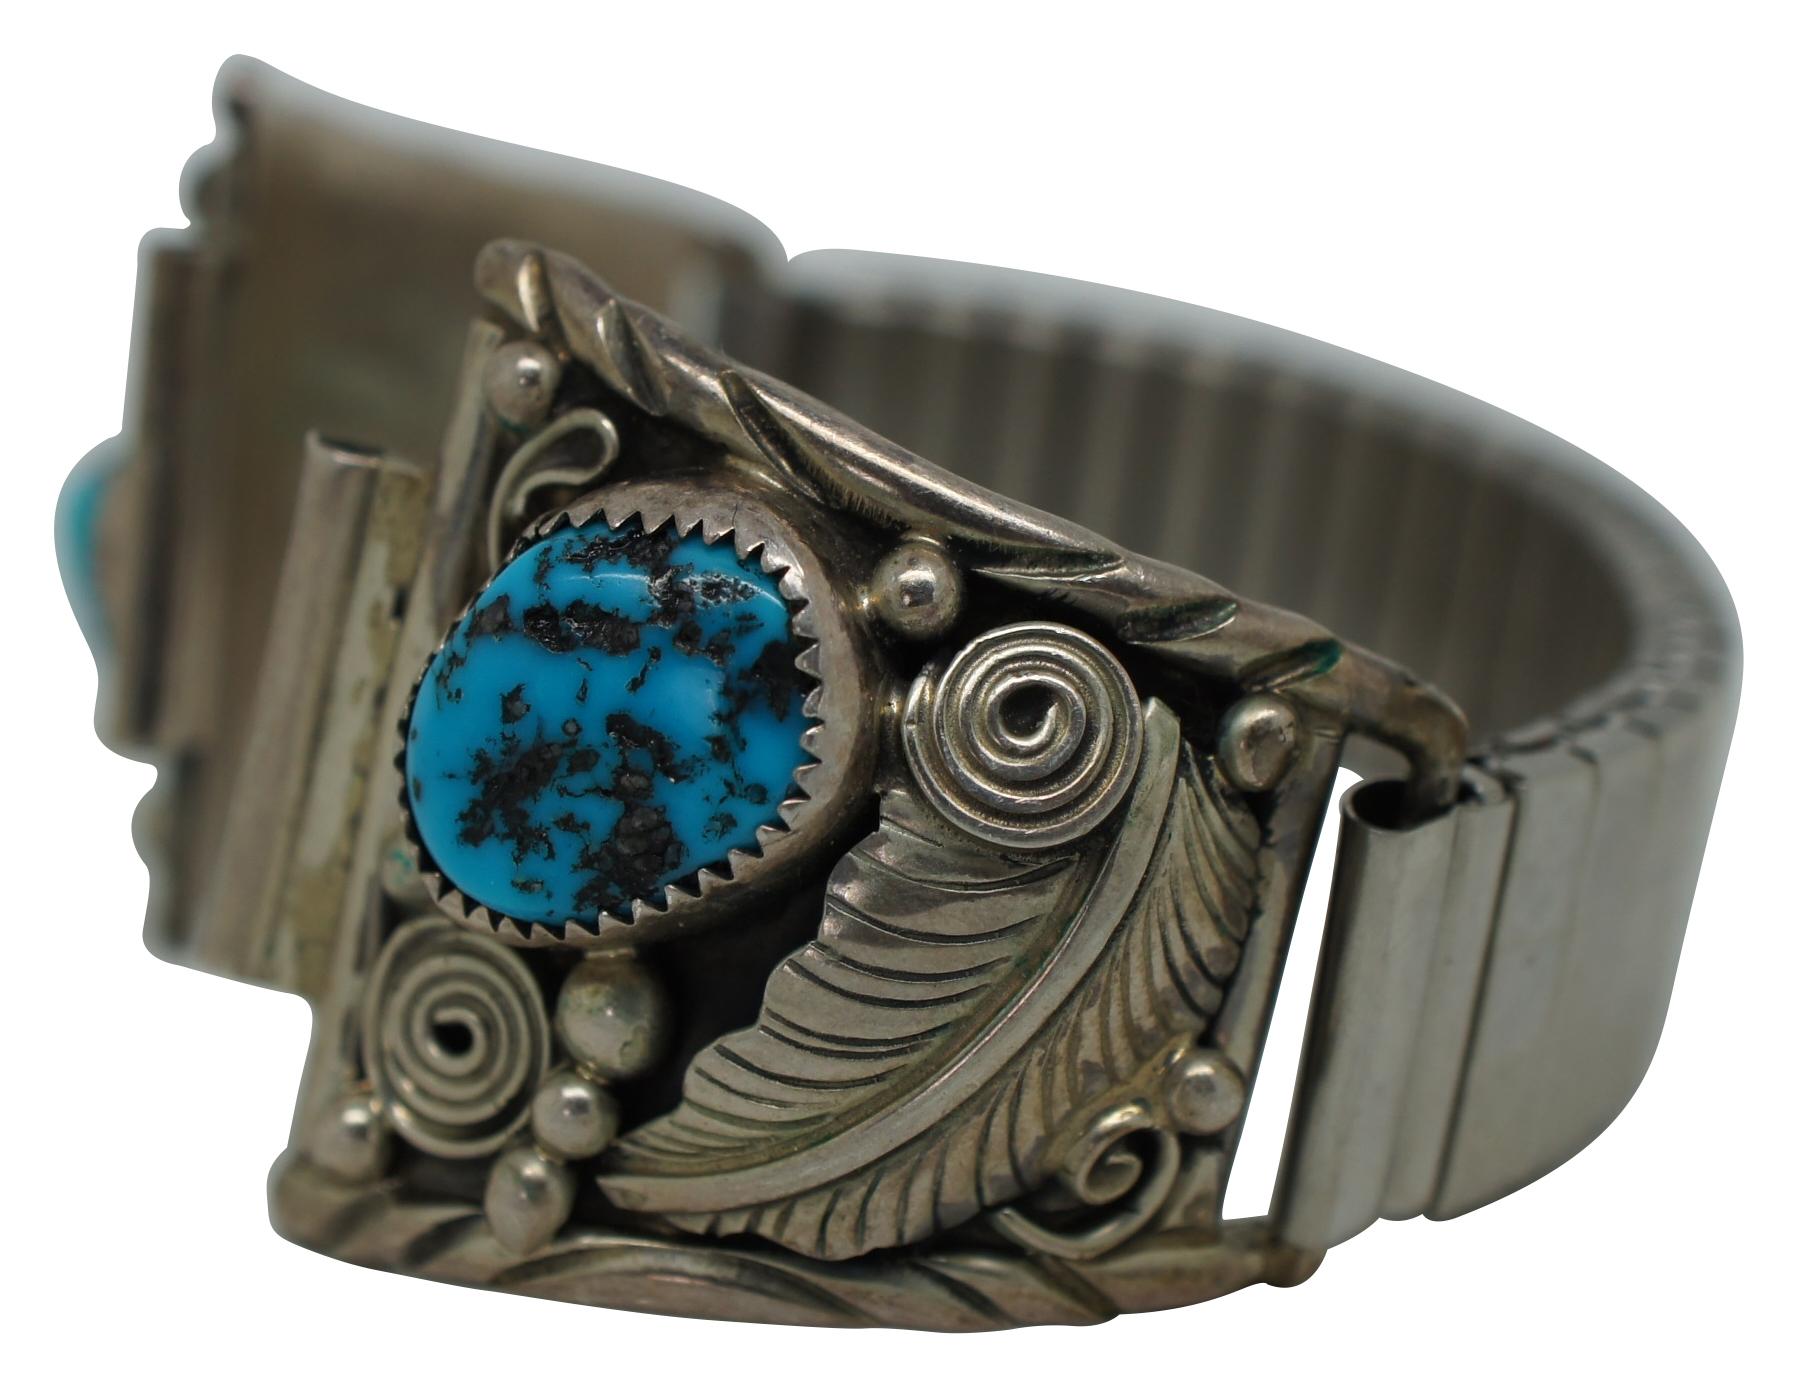 Vintage sterling silver 925 and polished turquoise stone watch band featuring a southwest design of beads, spiral and feathers around the stones and a lightly patterned flexible metal Expansion band; marked AY Sterling.

Measures: 6.5” x 1.25”